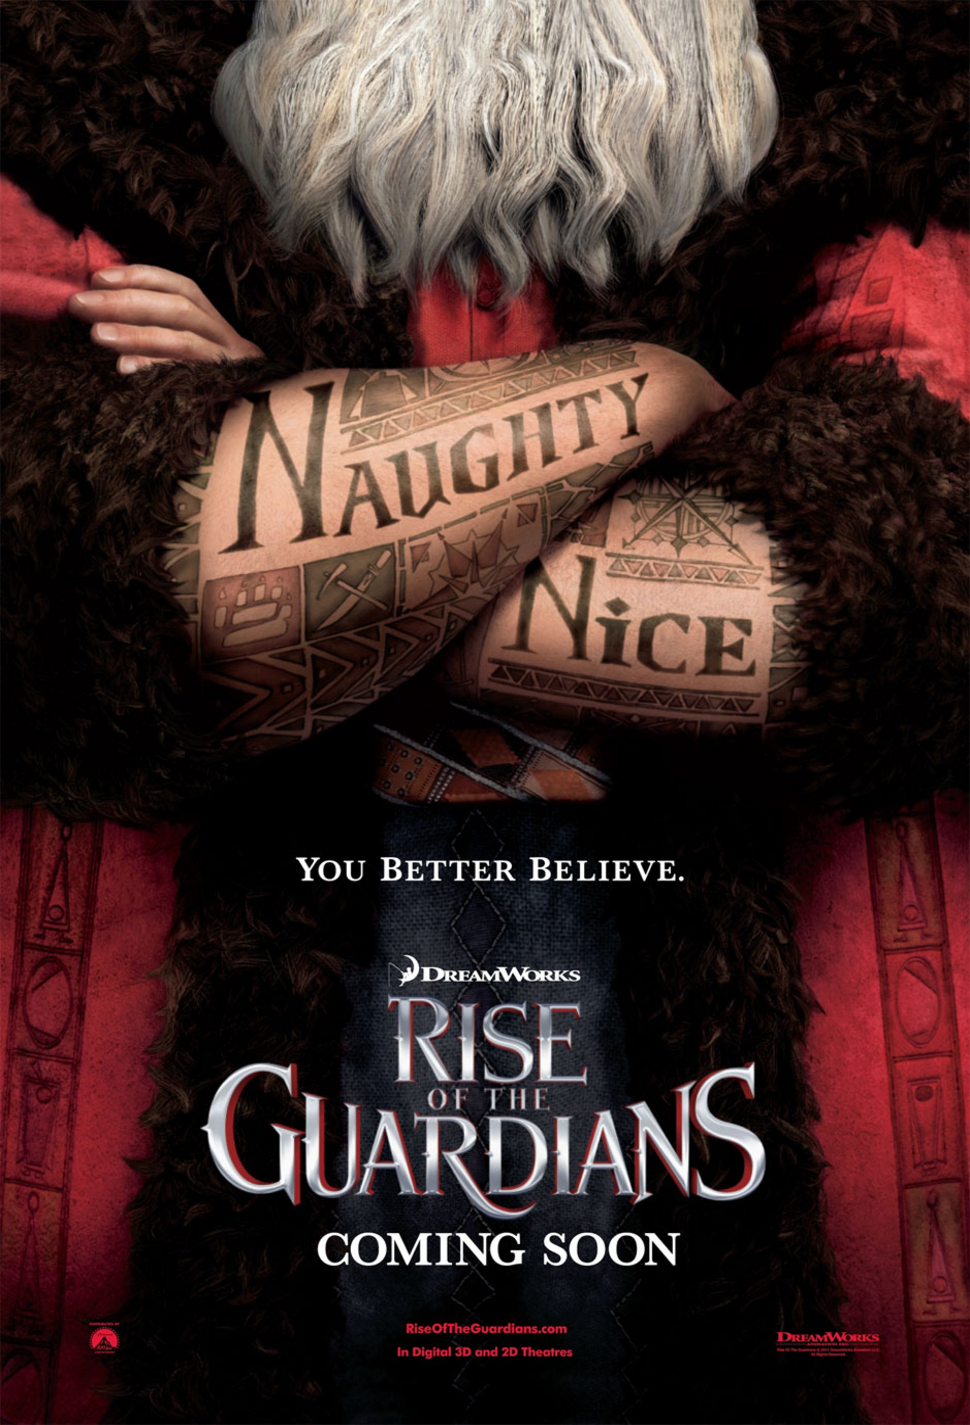 Rise of the Guardians - Movie Poster #3 (Original)